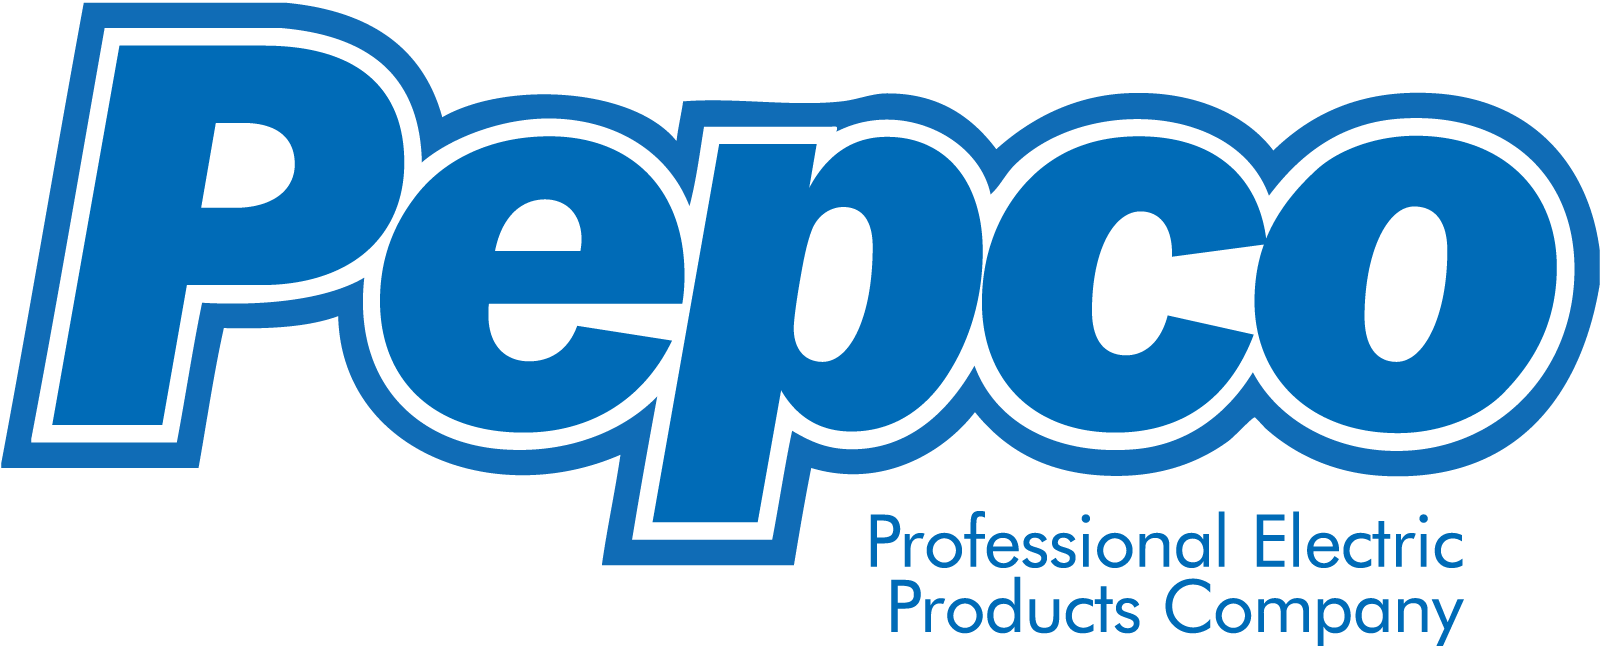 Pepco Logo - Home - Pepco Professional Electric Products - Cleveland, Akron ...